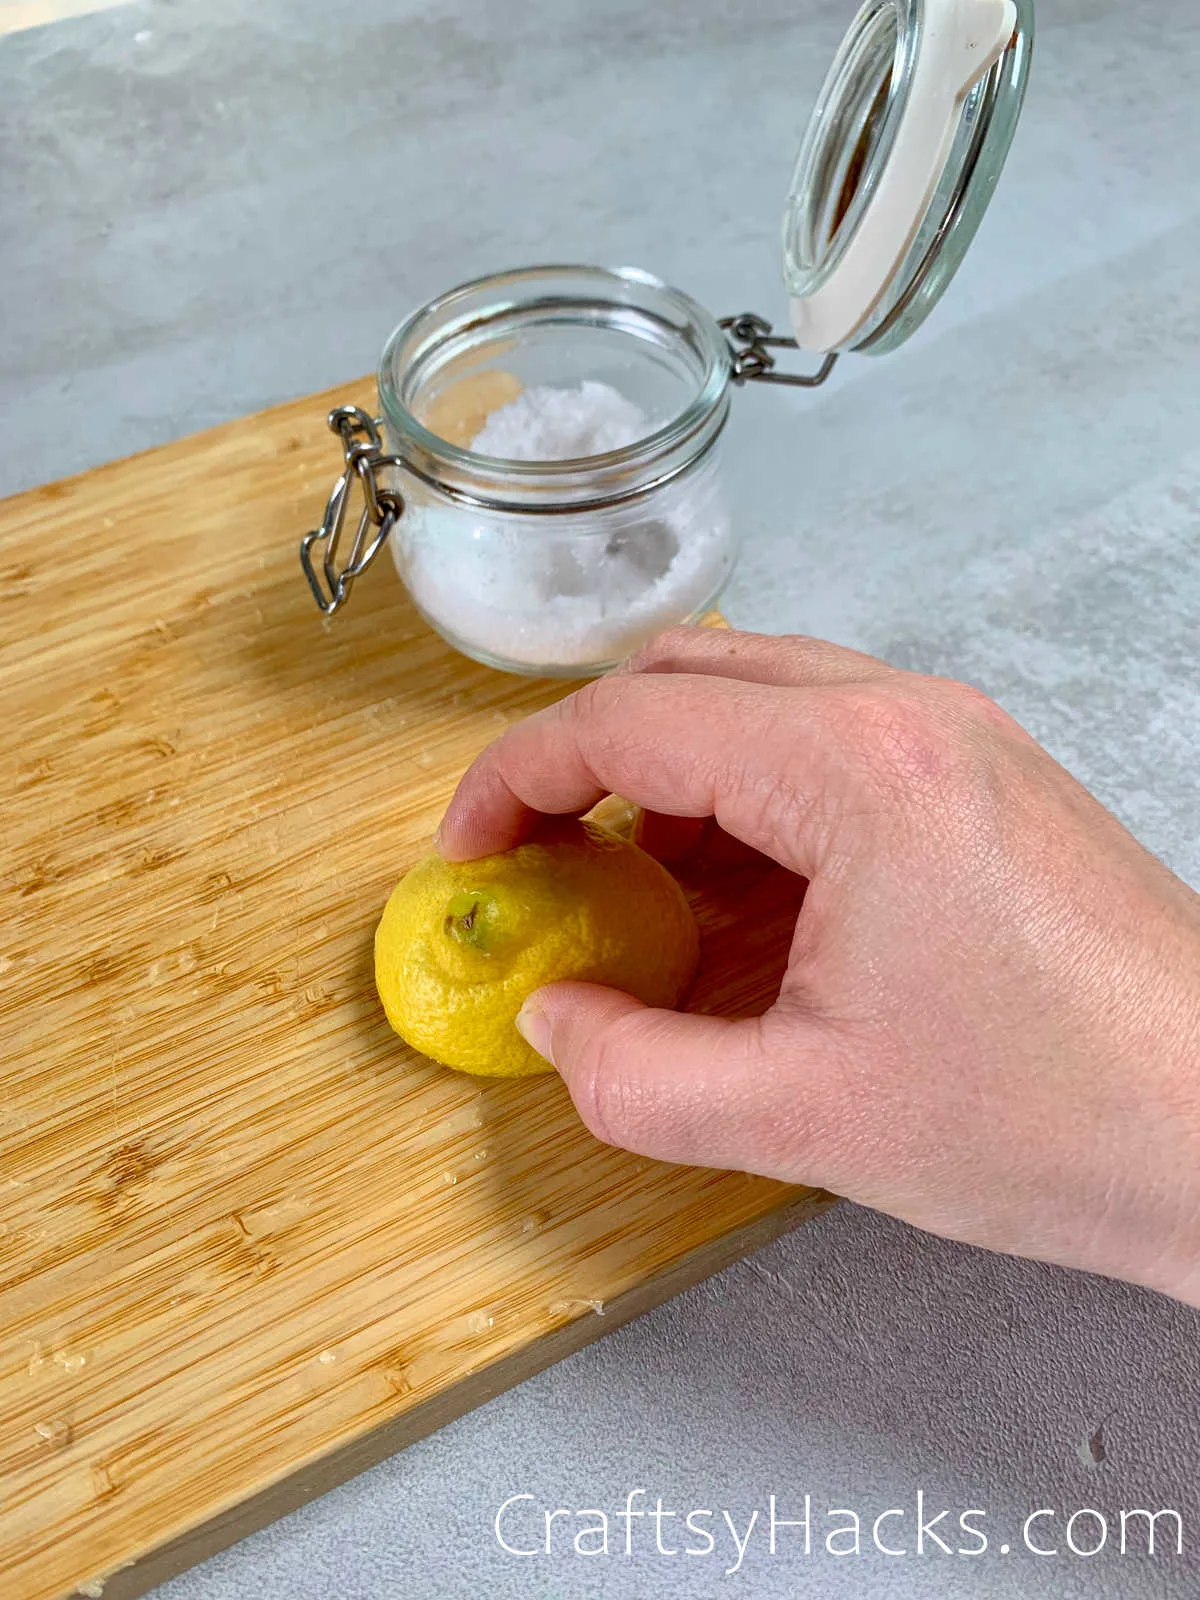 use lemons to clean cutting boards.